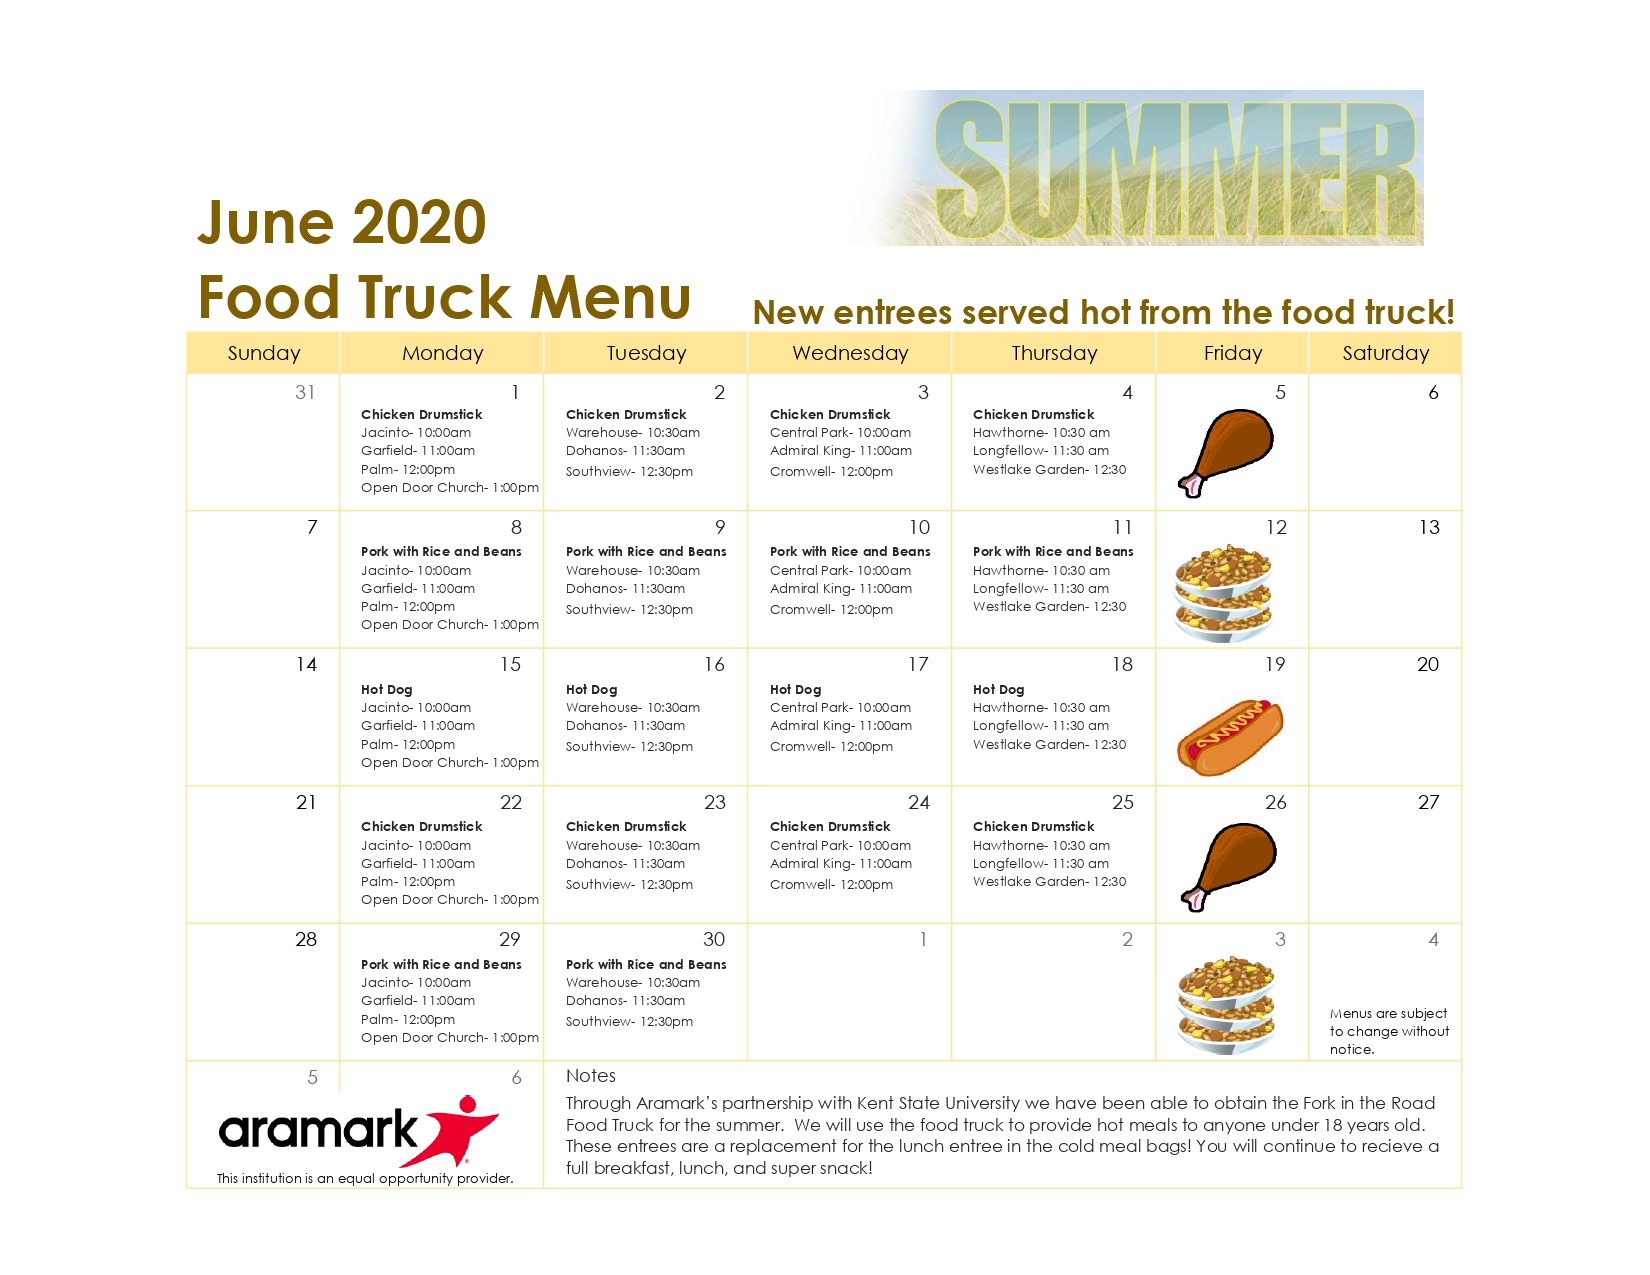 Article Aramark Now Serving Hot Lunches During Summer Break